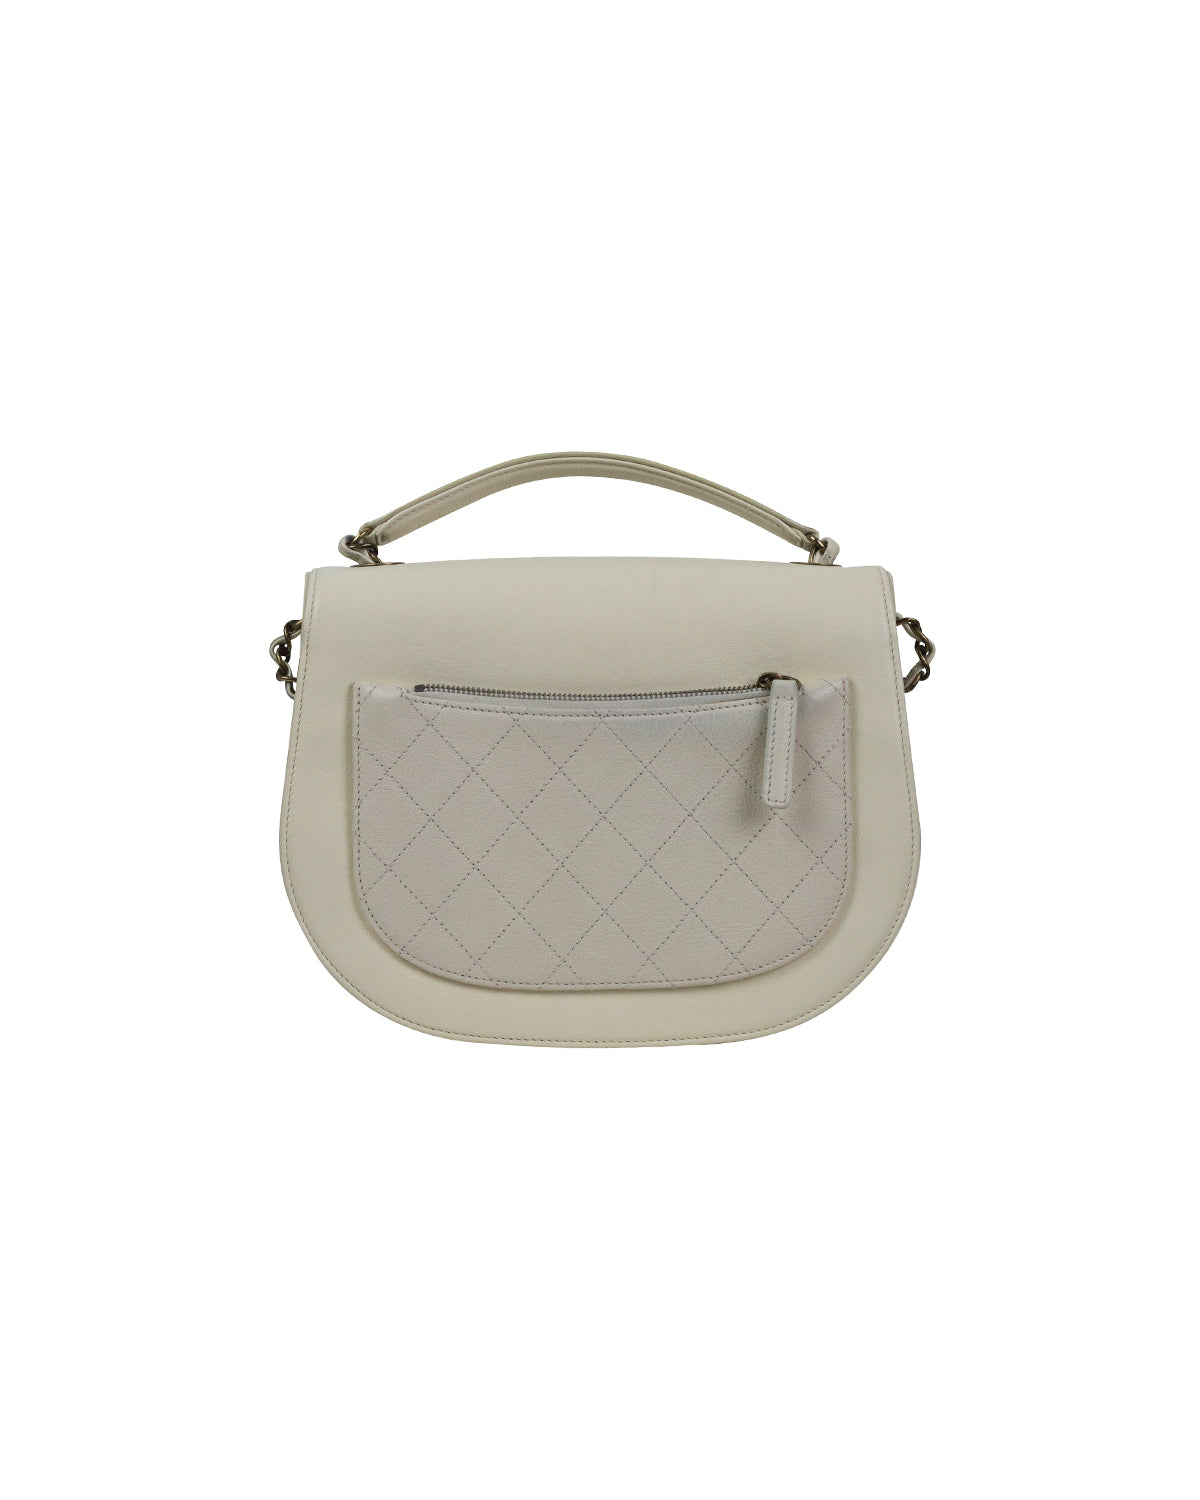 Chanel Coco Curve Ivory Flap Bag